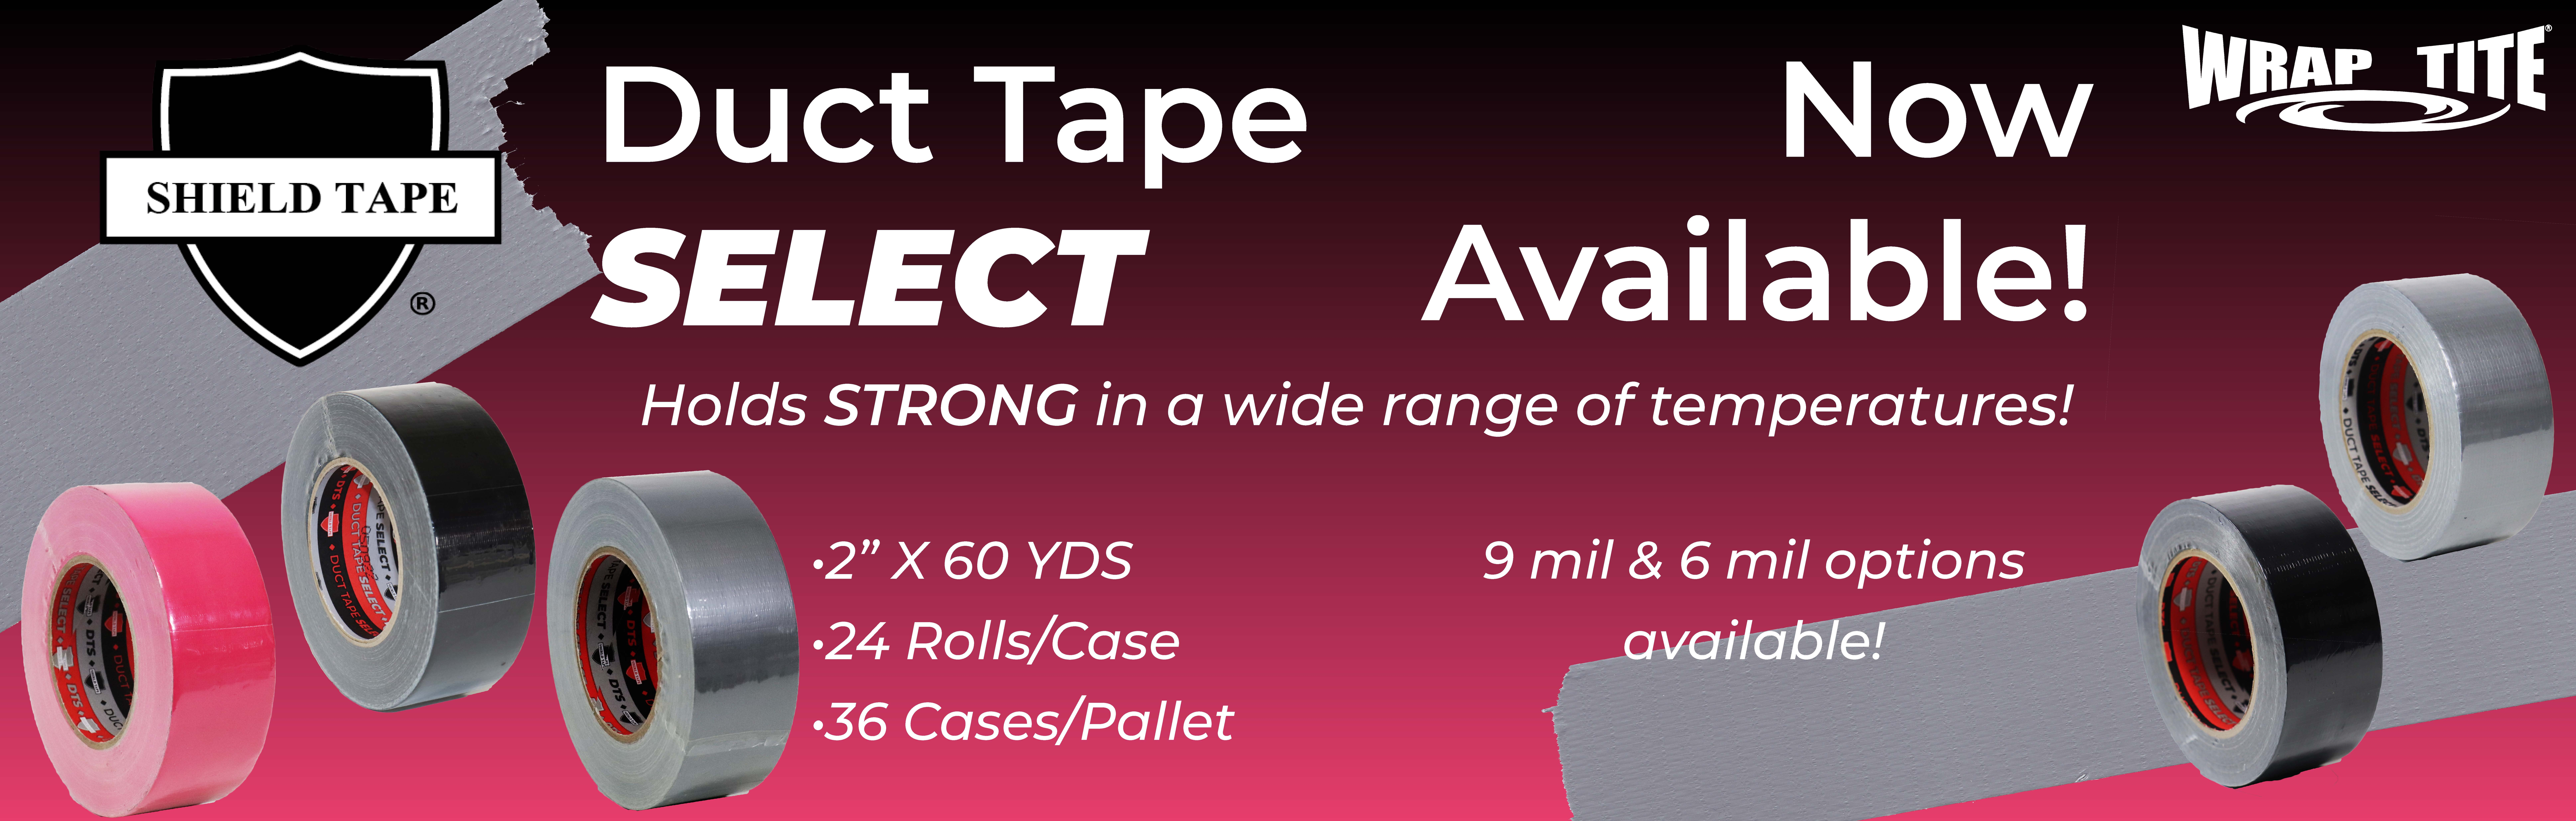 New Duct Tape Select branded Duct Tape by Wrap-Tite: Your one stop shop for all your packaging and shipping needs